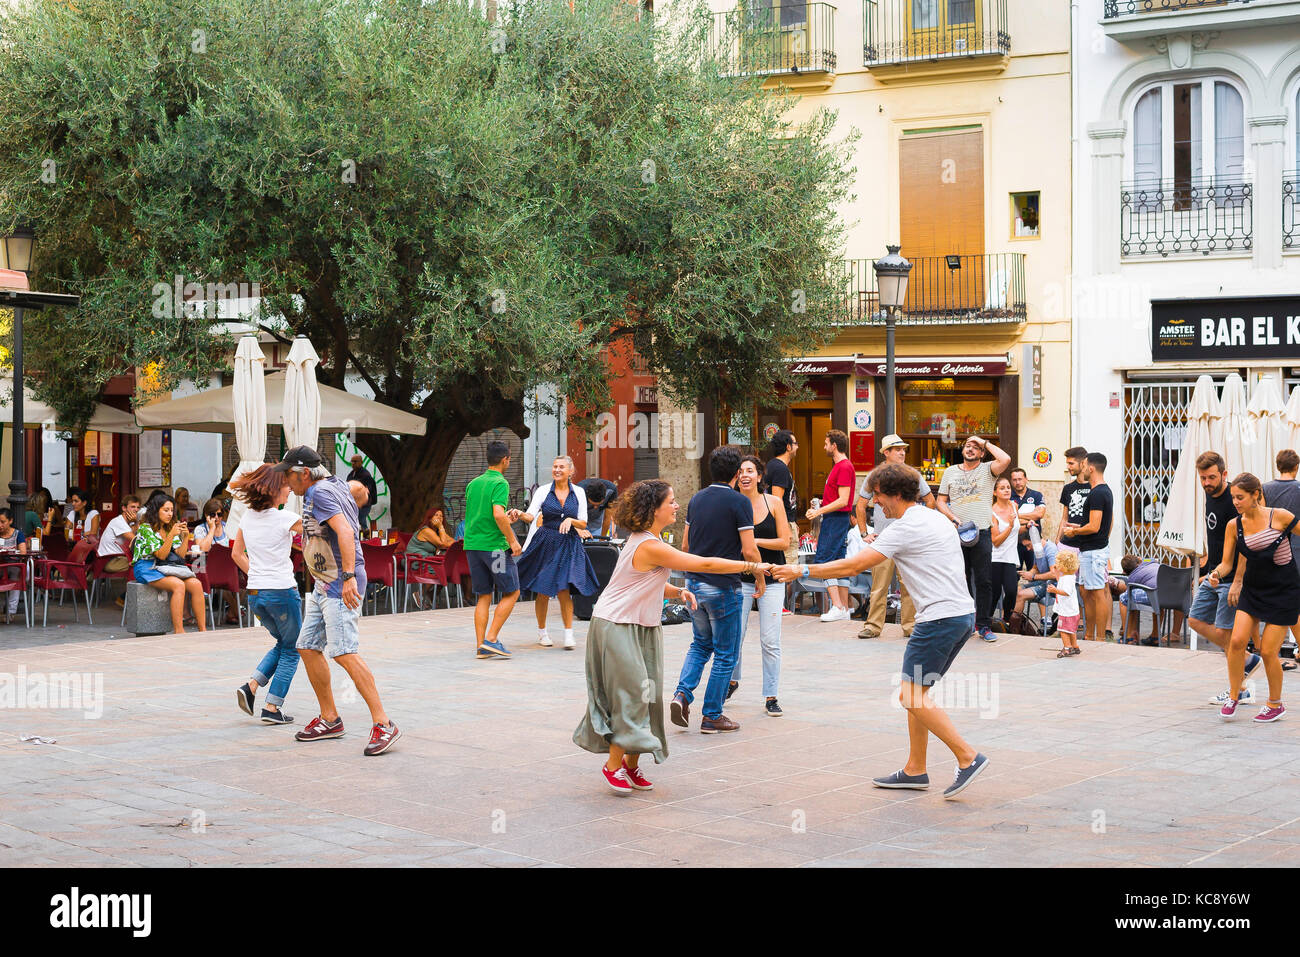 Couples dancing, on a summer evening in the Plaza del Dr Collado in Valencia old town couples enjoy a 1940's style dance session, Valencia, Spain. Stock Photo